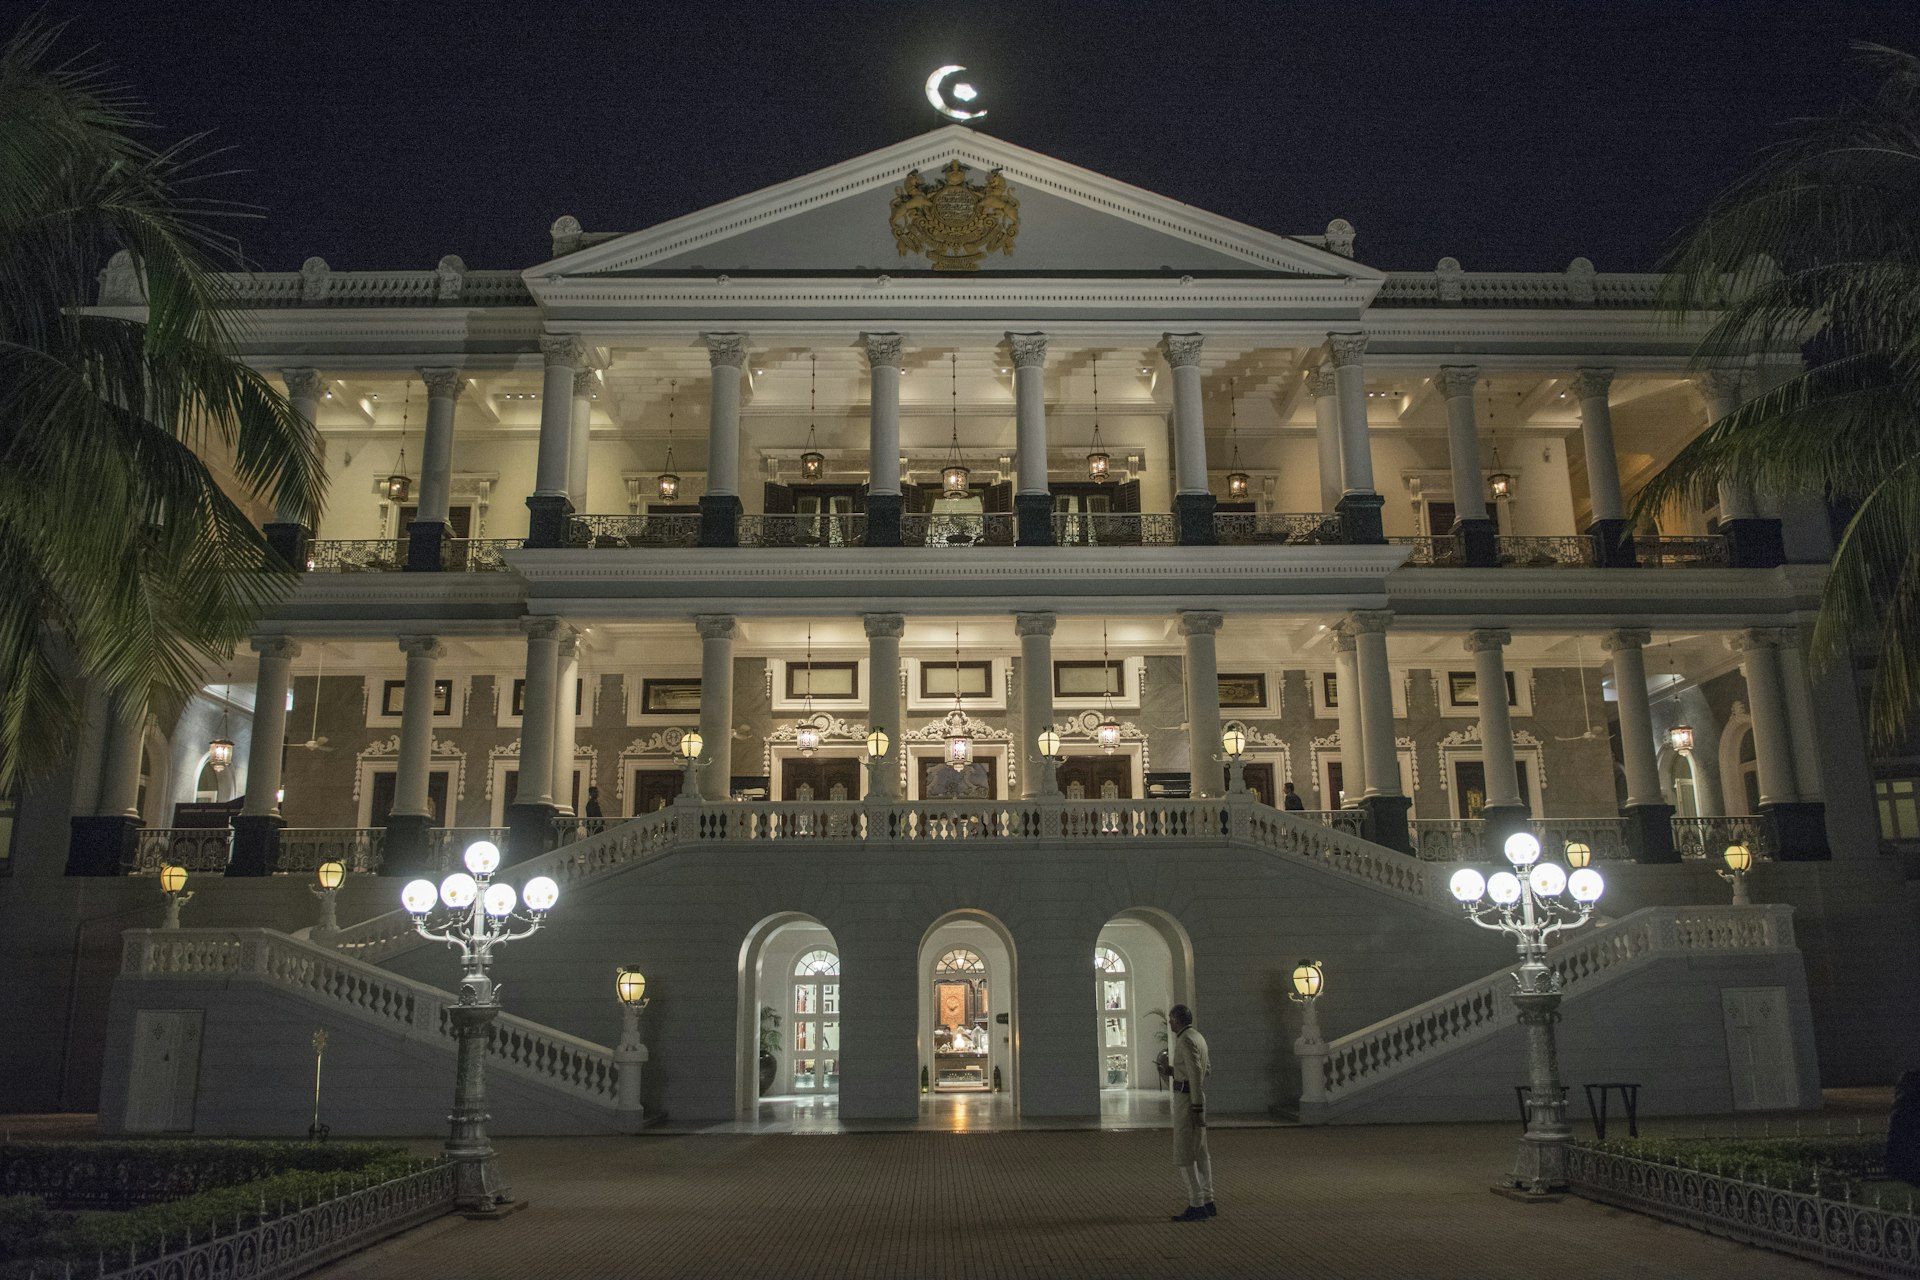 The grand frontage of the Falaknuma Palace at night